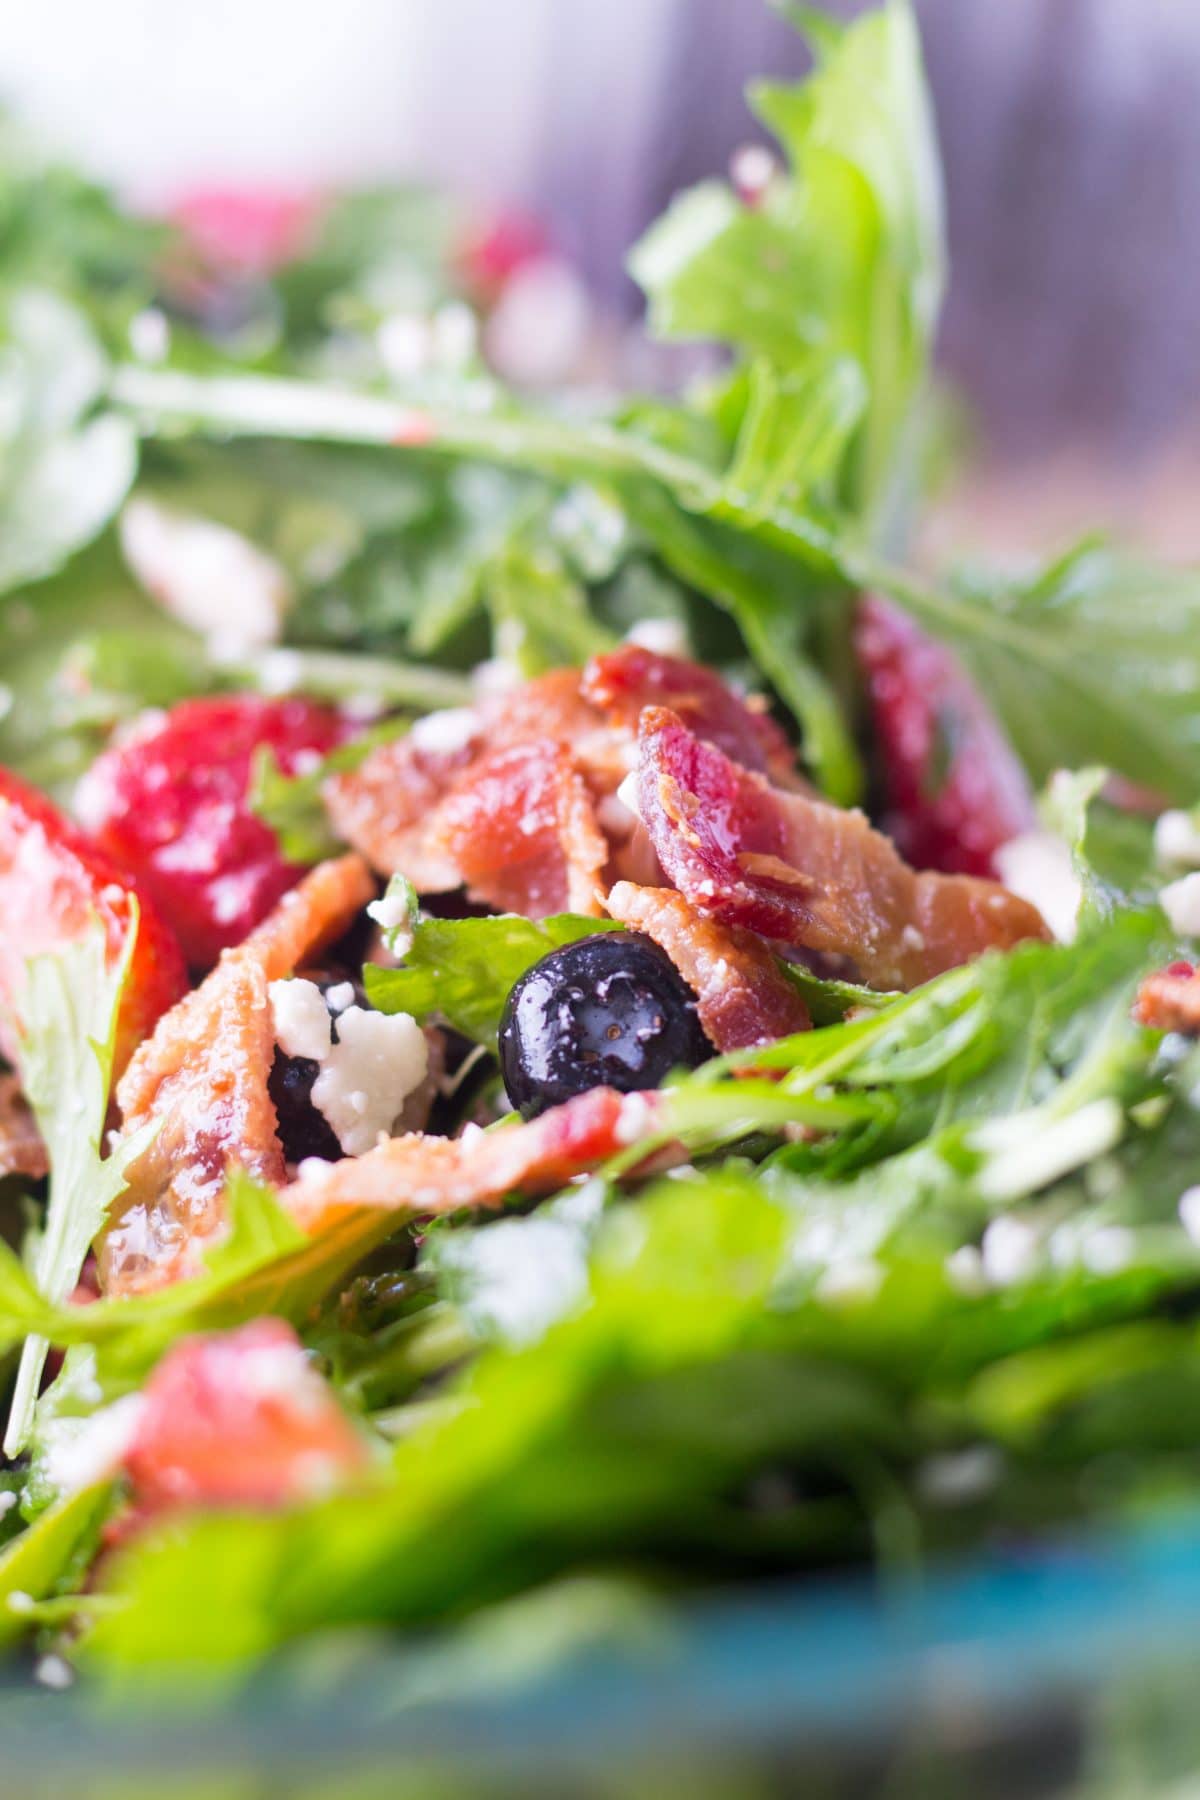 Berry Bacon Salad with Red Wine Vinaigrette